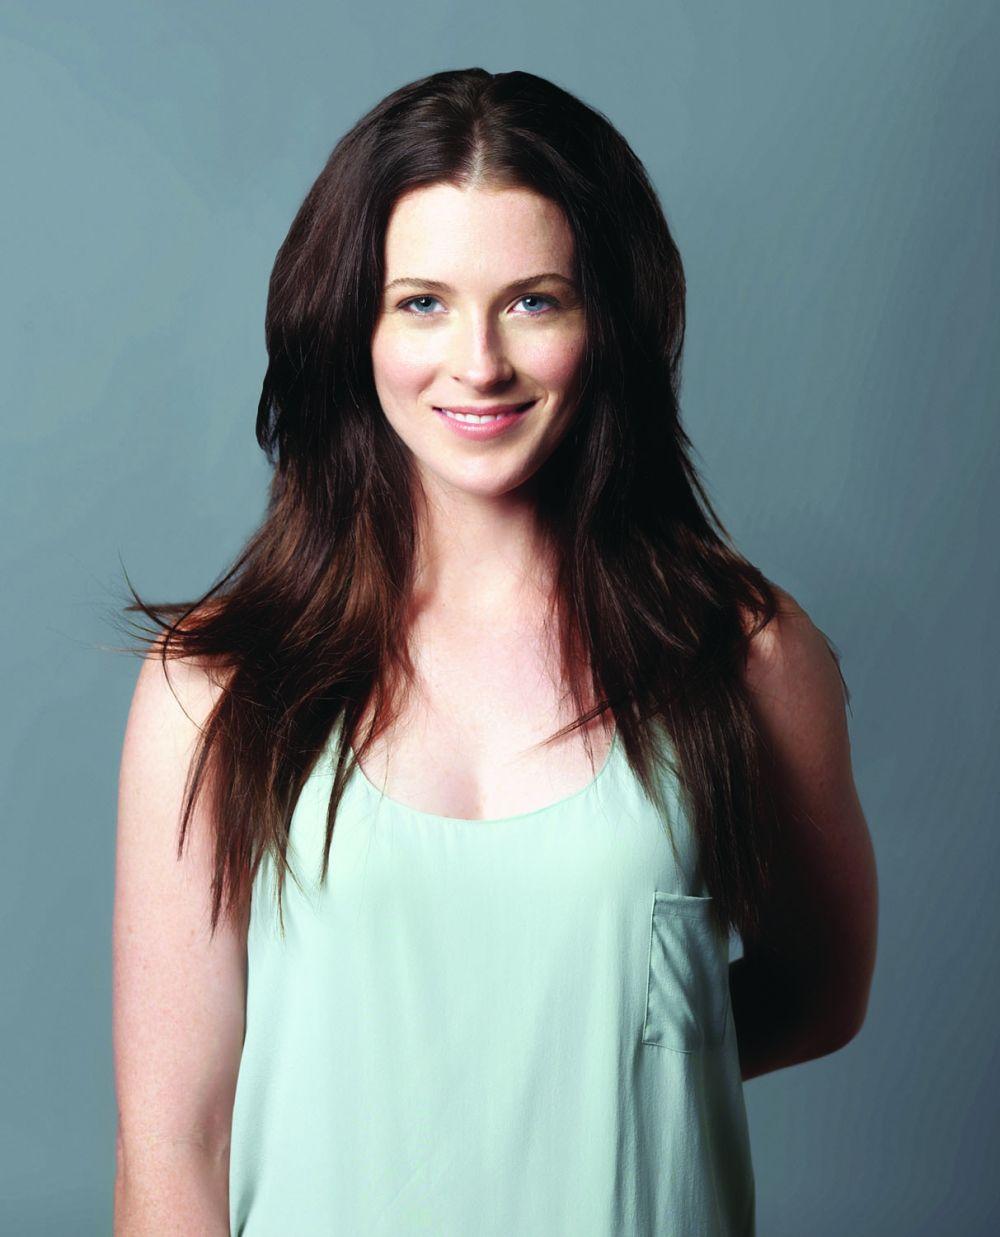 51 Hottest Bridget Regan Big Butt Pictures Will Drive You Wildly Enchanted With This Dashing Damsel | Best Of Comic Books